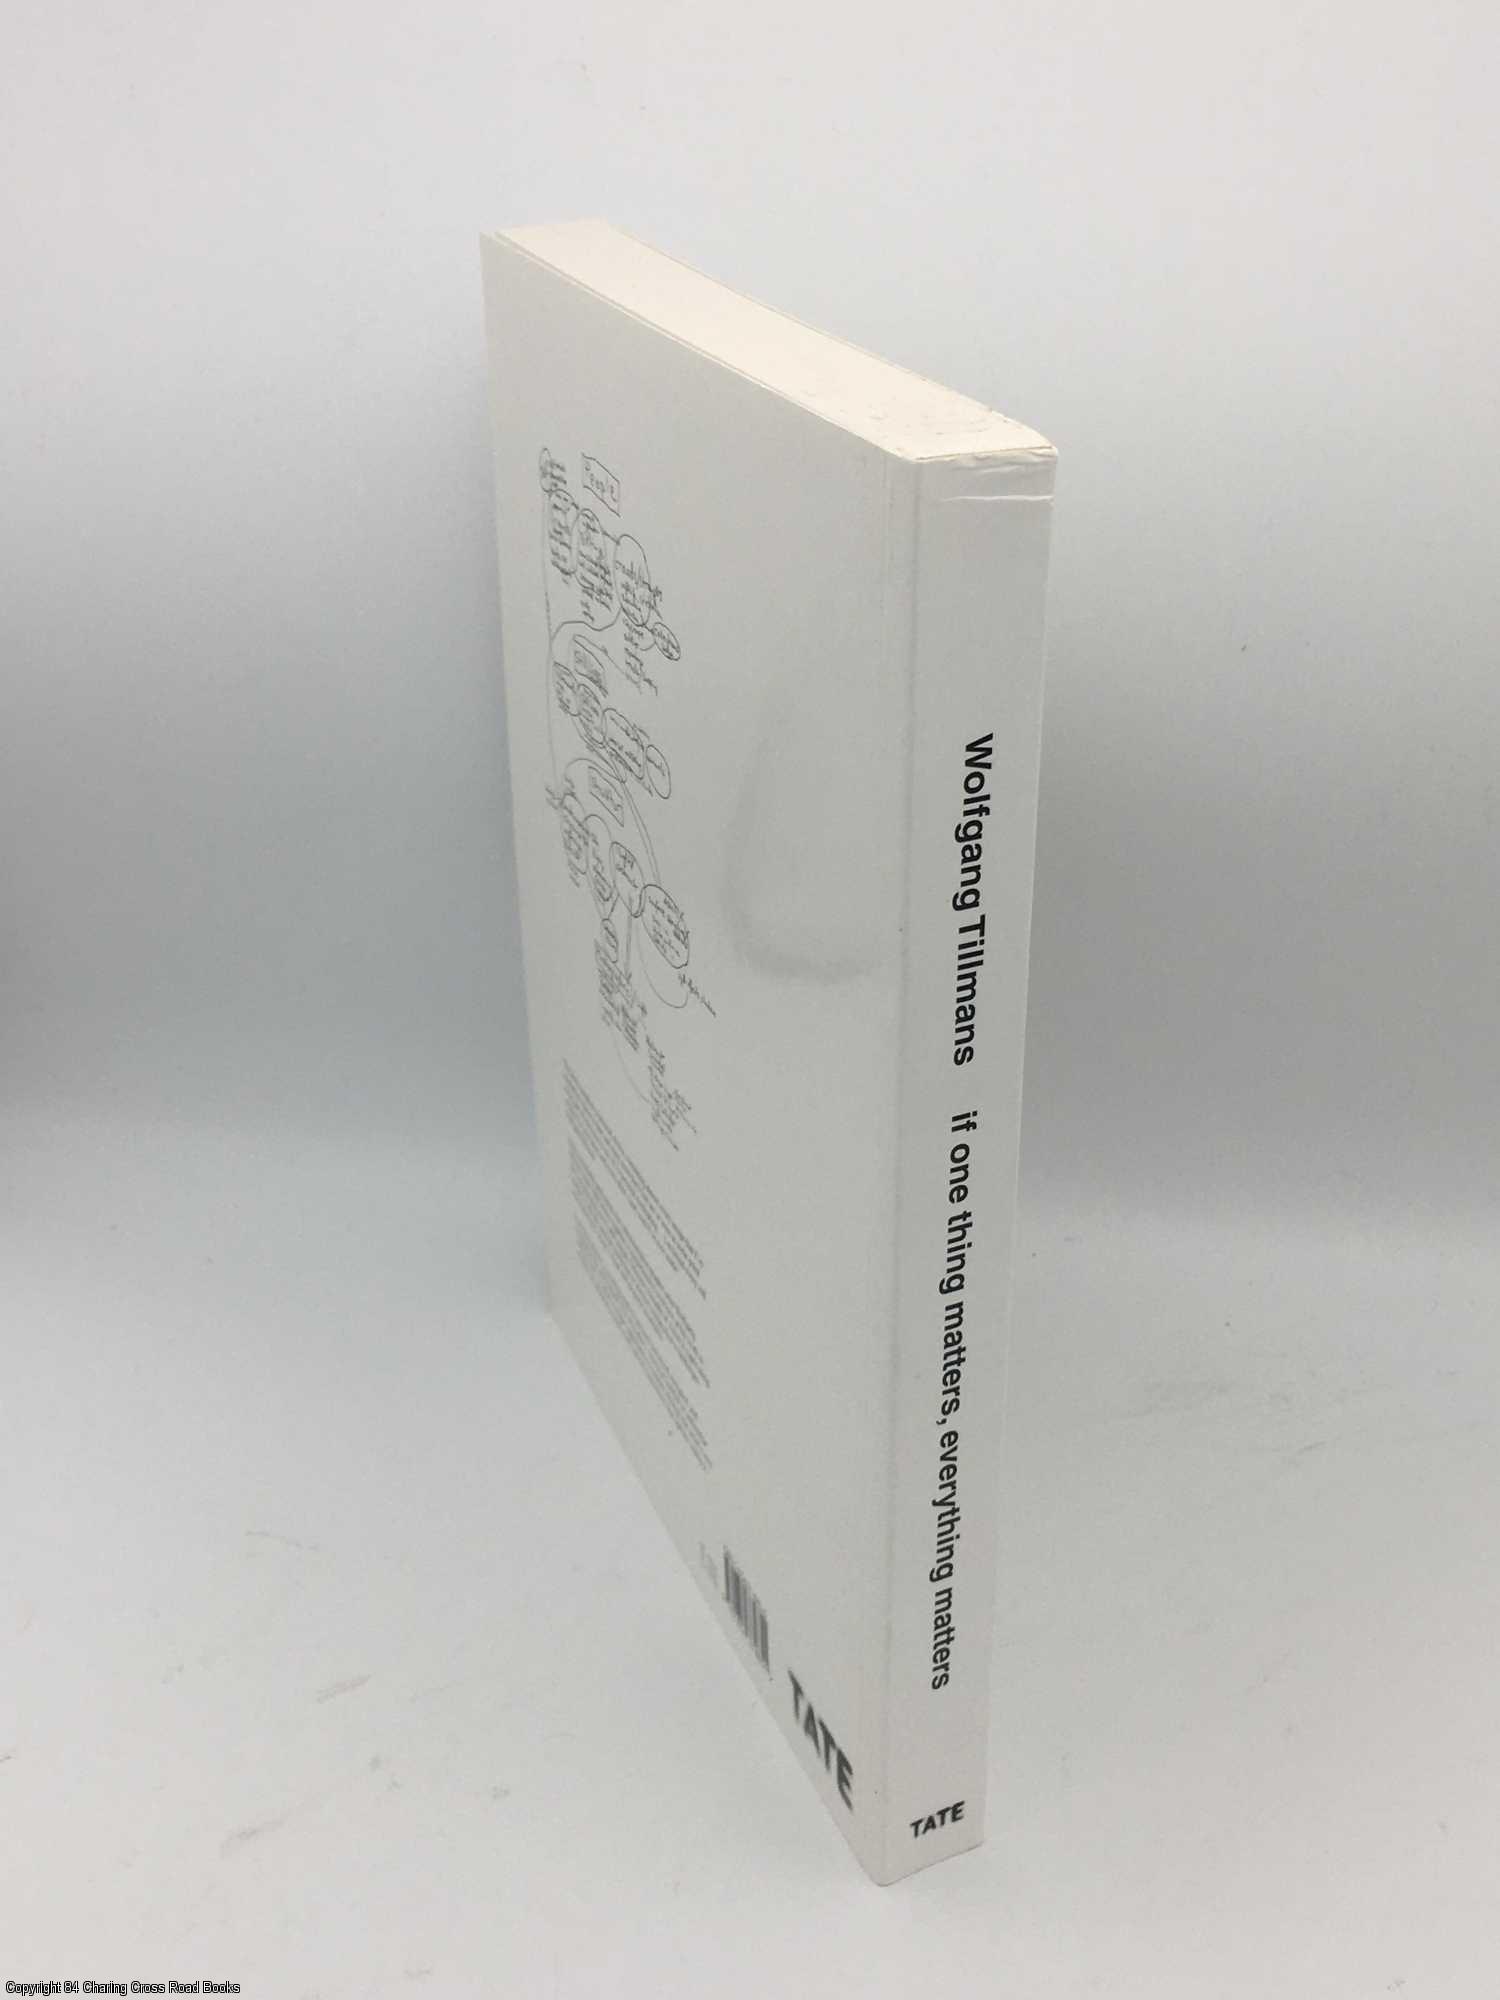 Wolfgang Tillmans: If One Thing Matters, Everything Matters by Wolfgang  Tillmans on 84 Charing Cross Rare Books